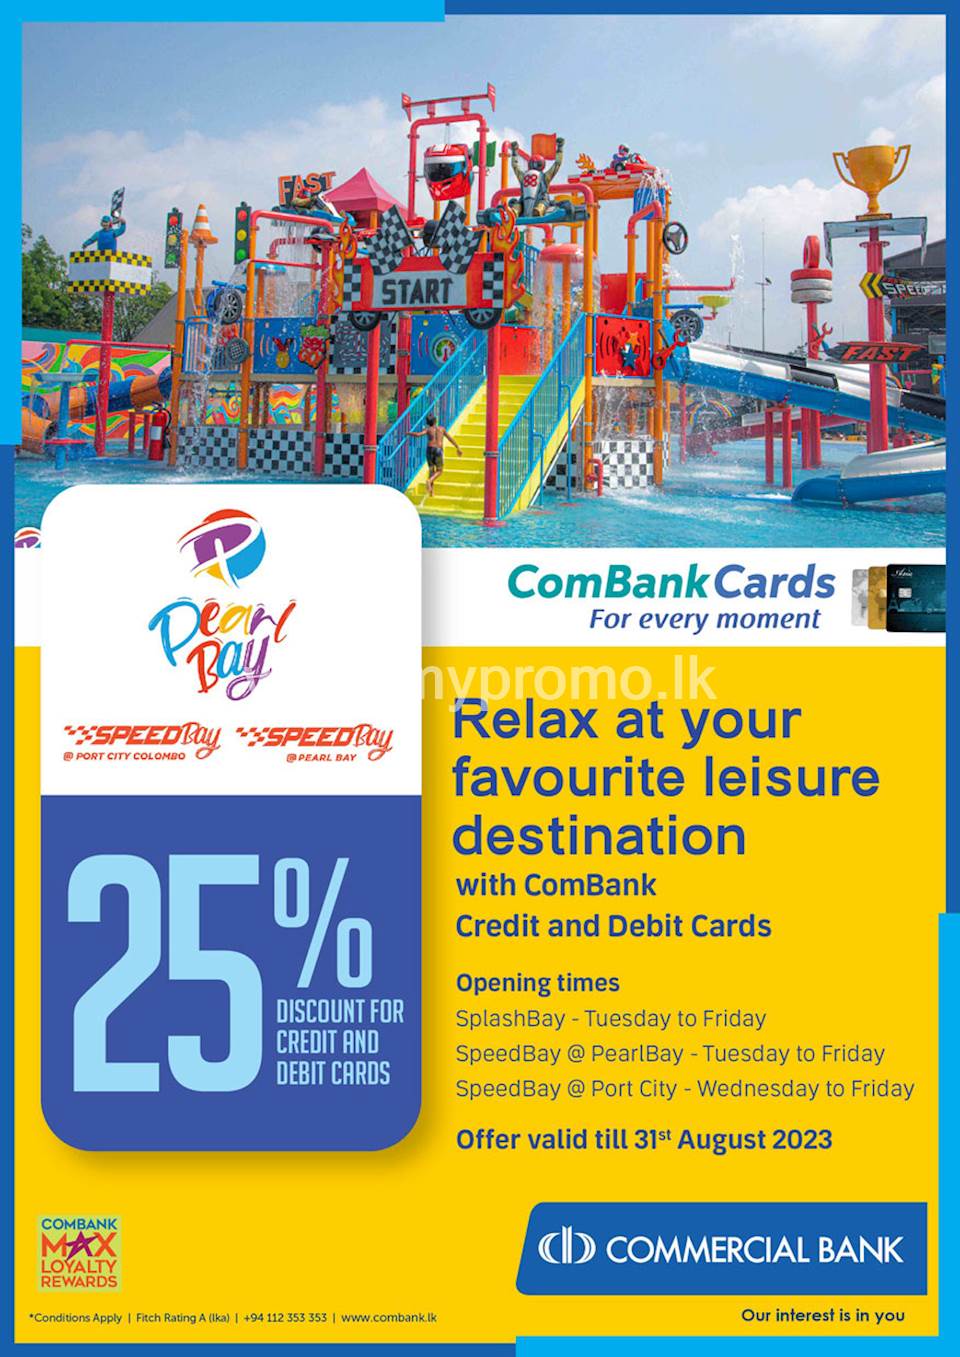 Relax at your favourite leisure destination with ComBank Credit and Debit Cards